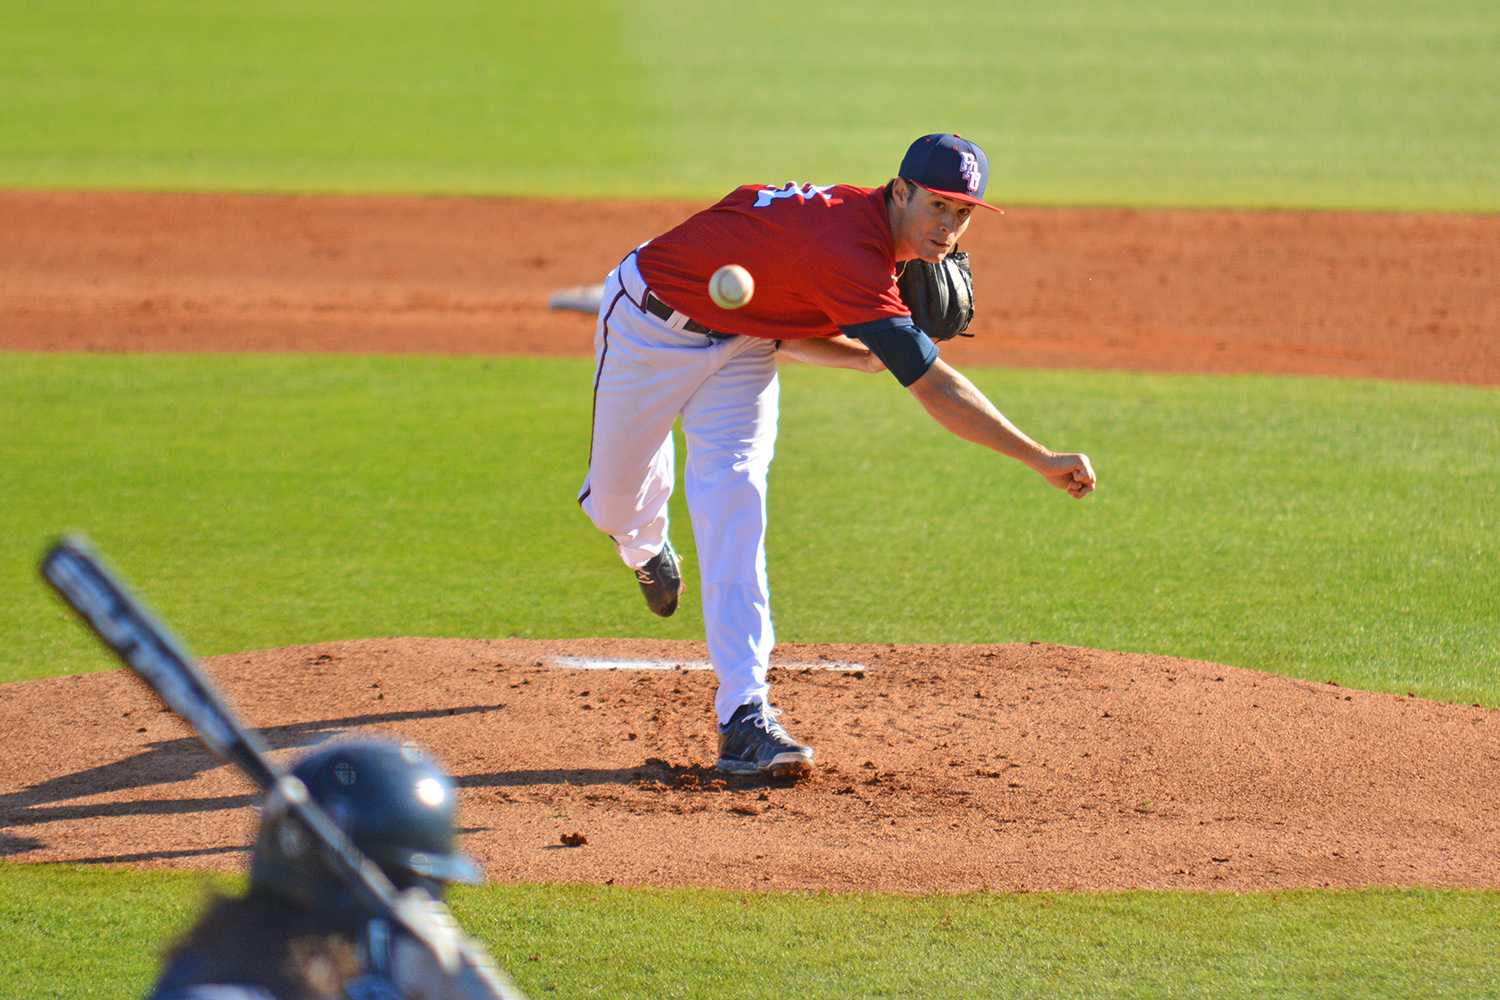 Senior pitcher Drew Jackson delivers a pitch to a UConn batter in the second game of the series. Jackson lasted 6 1/3 innings, striking out nine and walking one. 